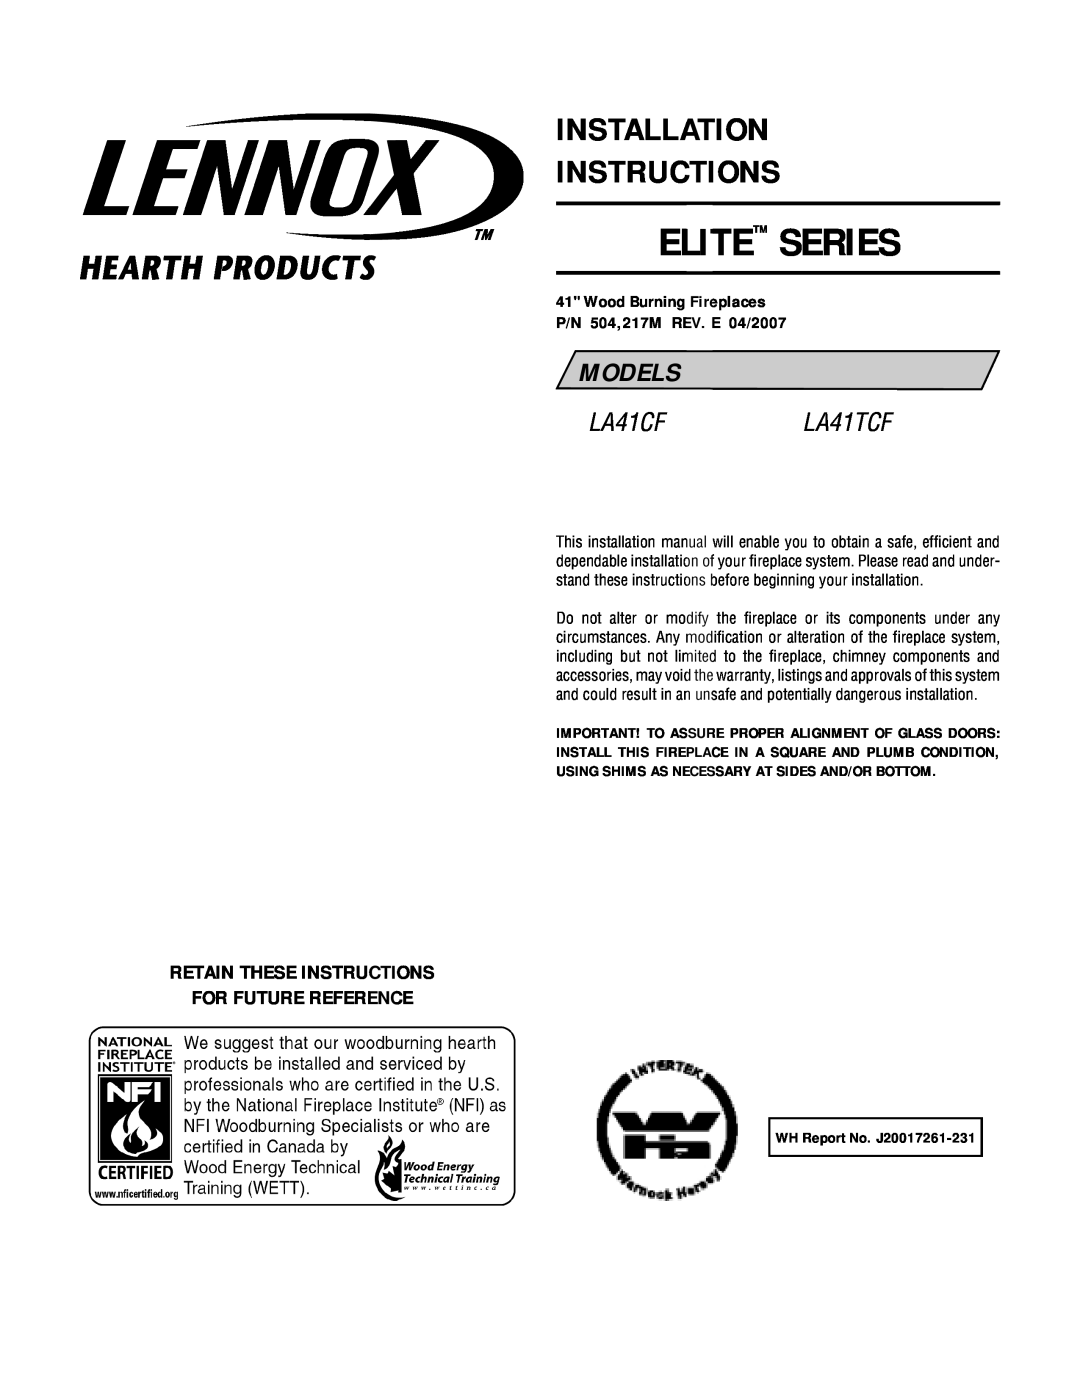 Lennox Hearth LA41CF installation instructions Retain These Instructions For Future Reference, Elite Series, Models 